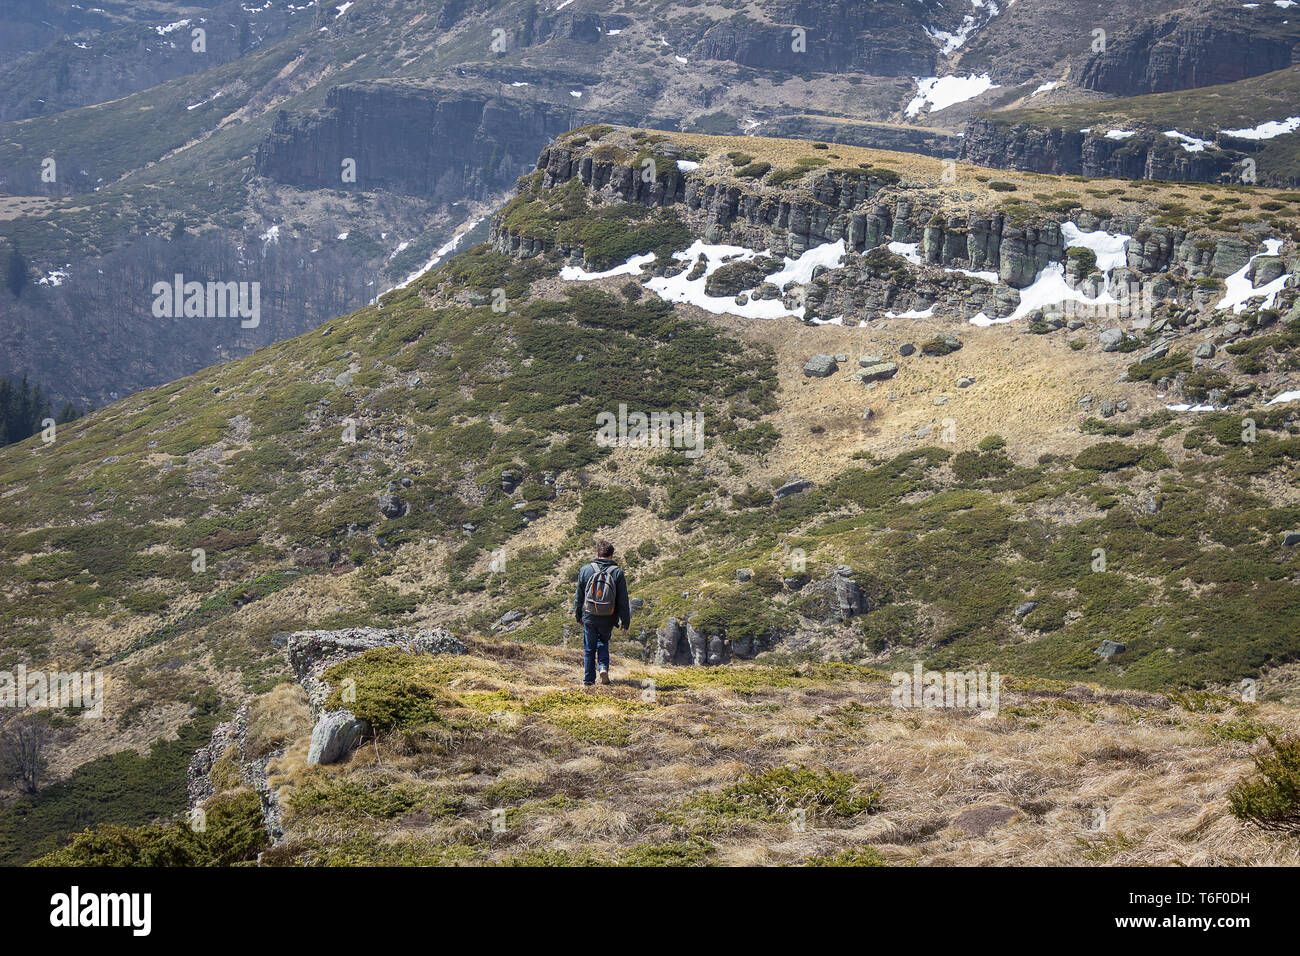 Mountain hiker walking down the rocky, sunlit highlands covered by snow, dry grass and juniper Stock Photo